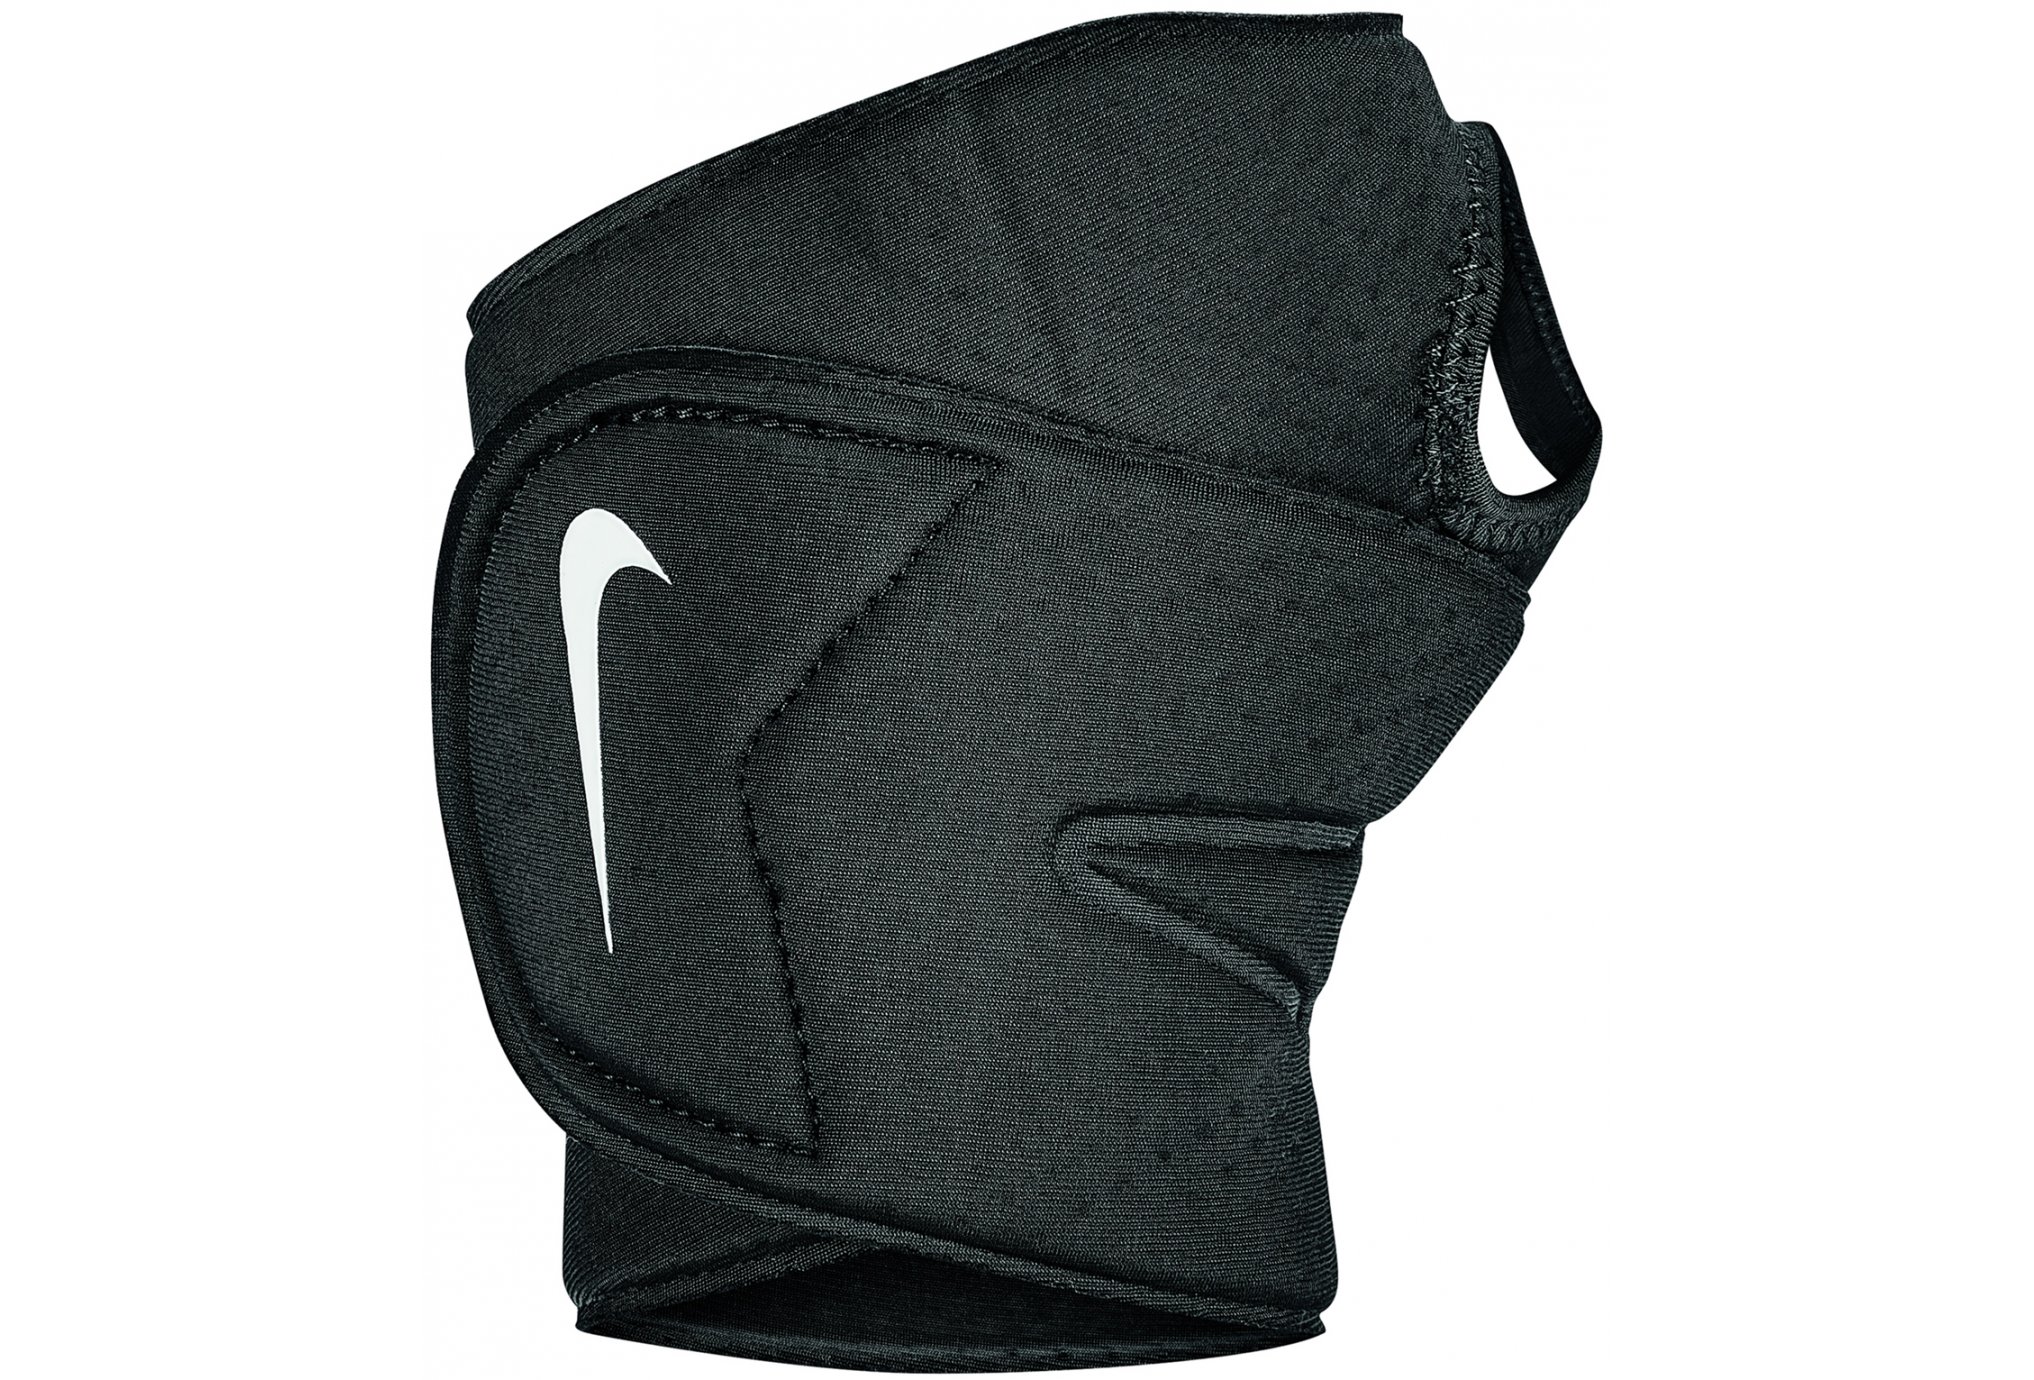 Nike Pro Wrist and Thumb Wrap 3.0 Protection musculaire & articulaire